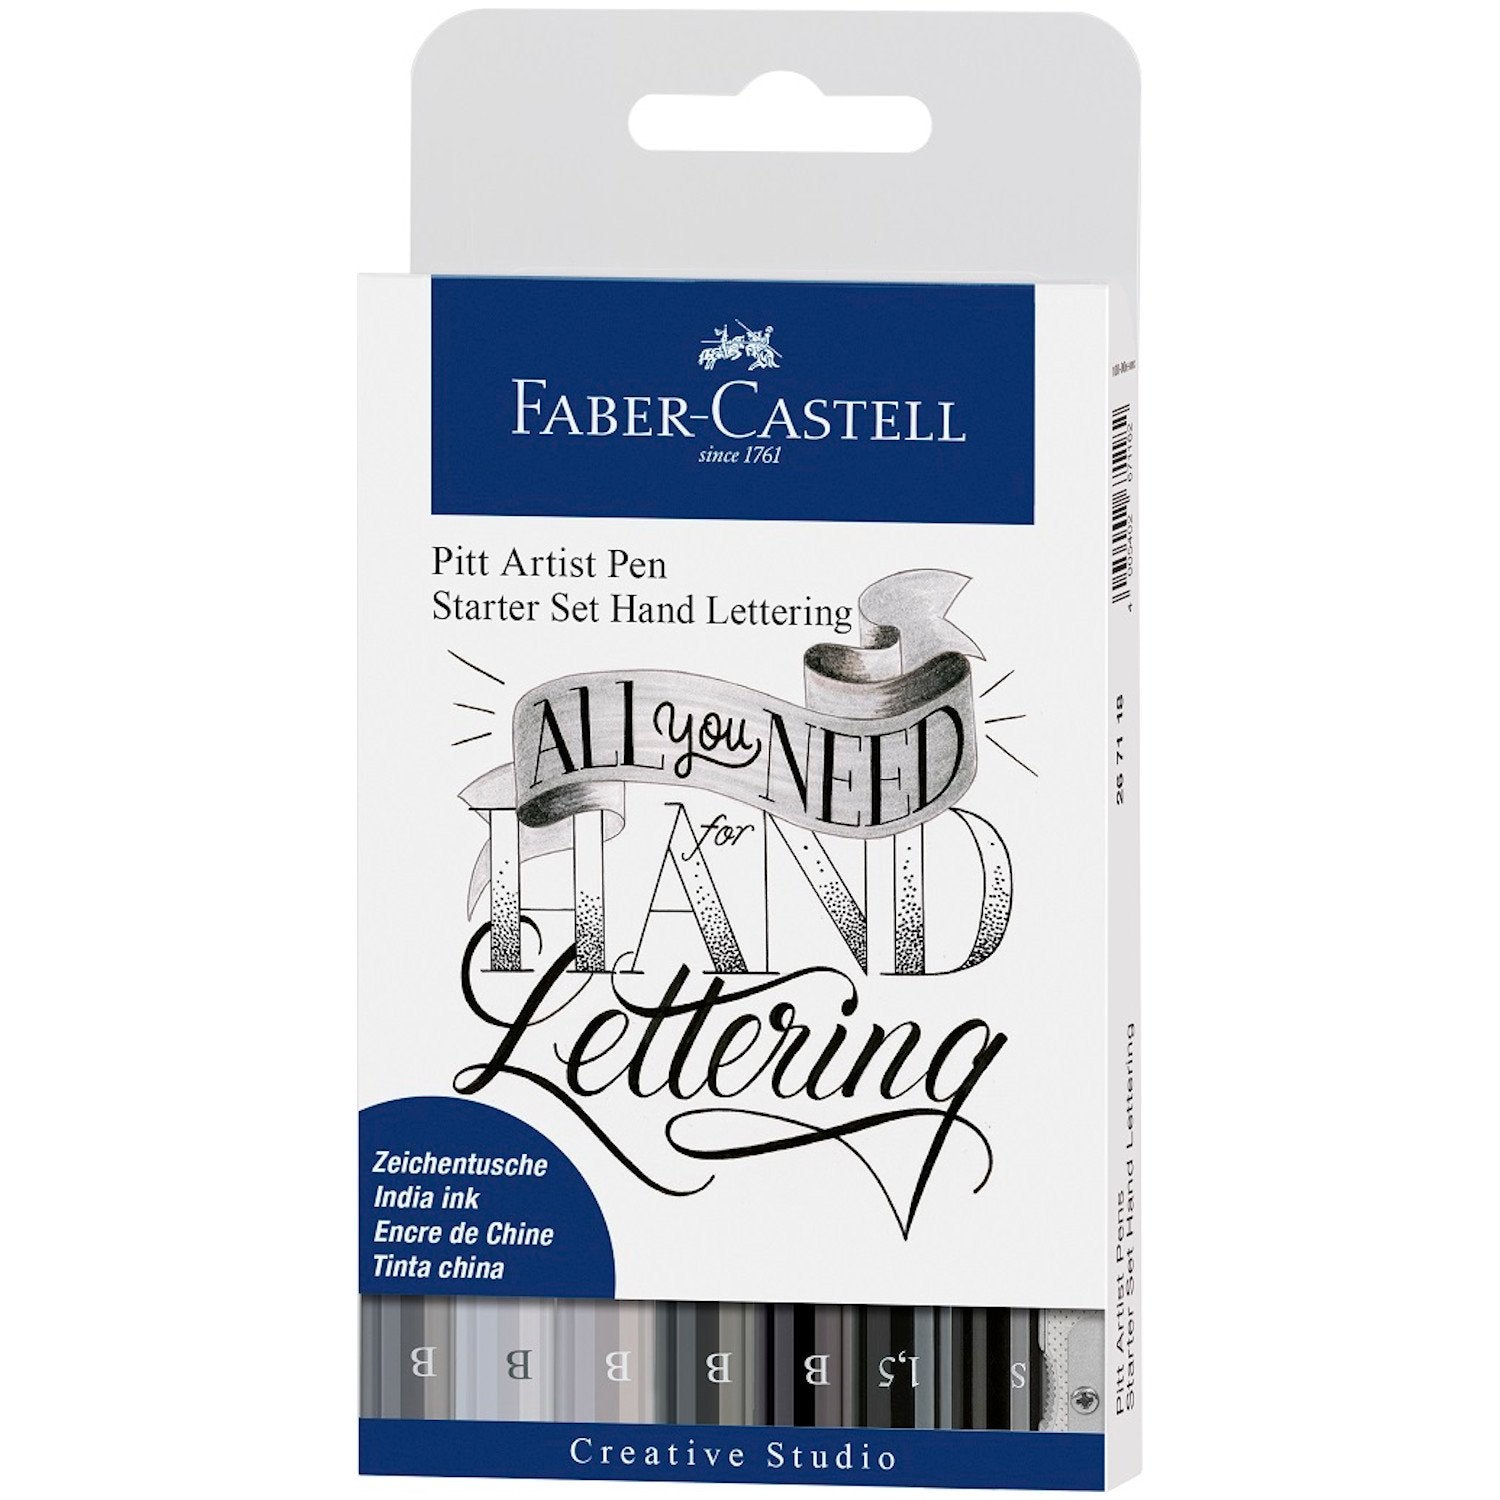 Marcadores Faber Castell Lettering KIT INICIO x 8